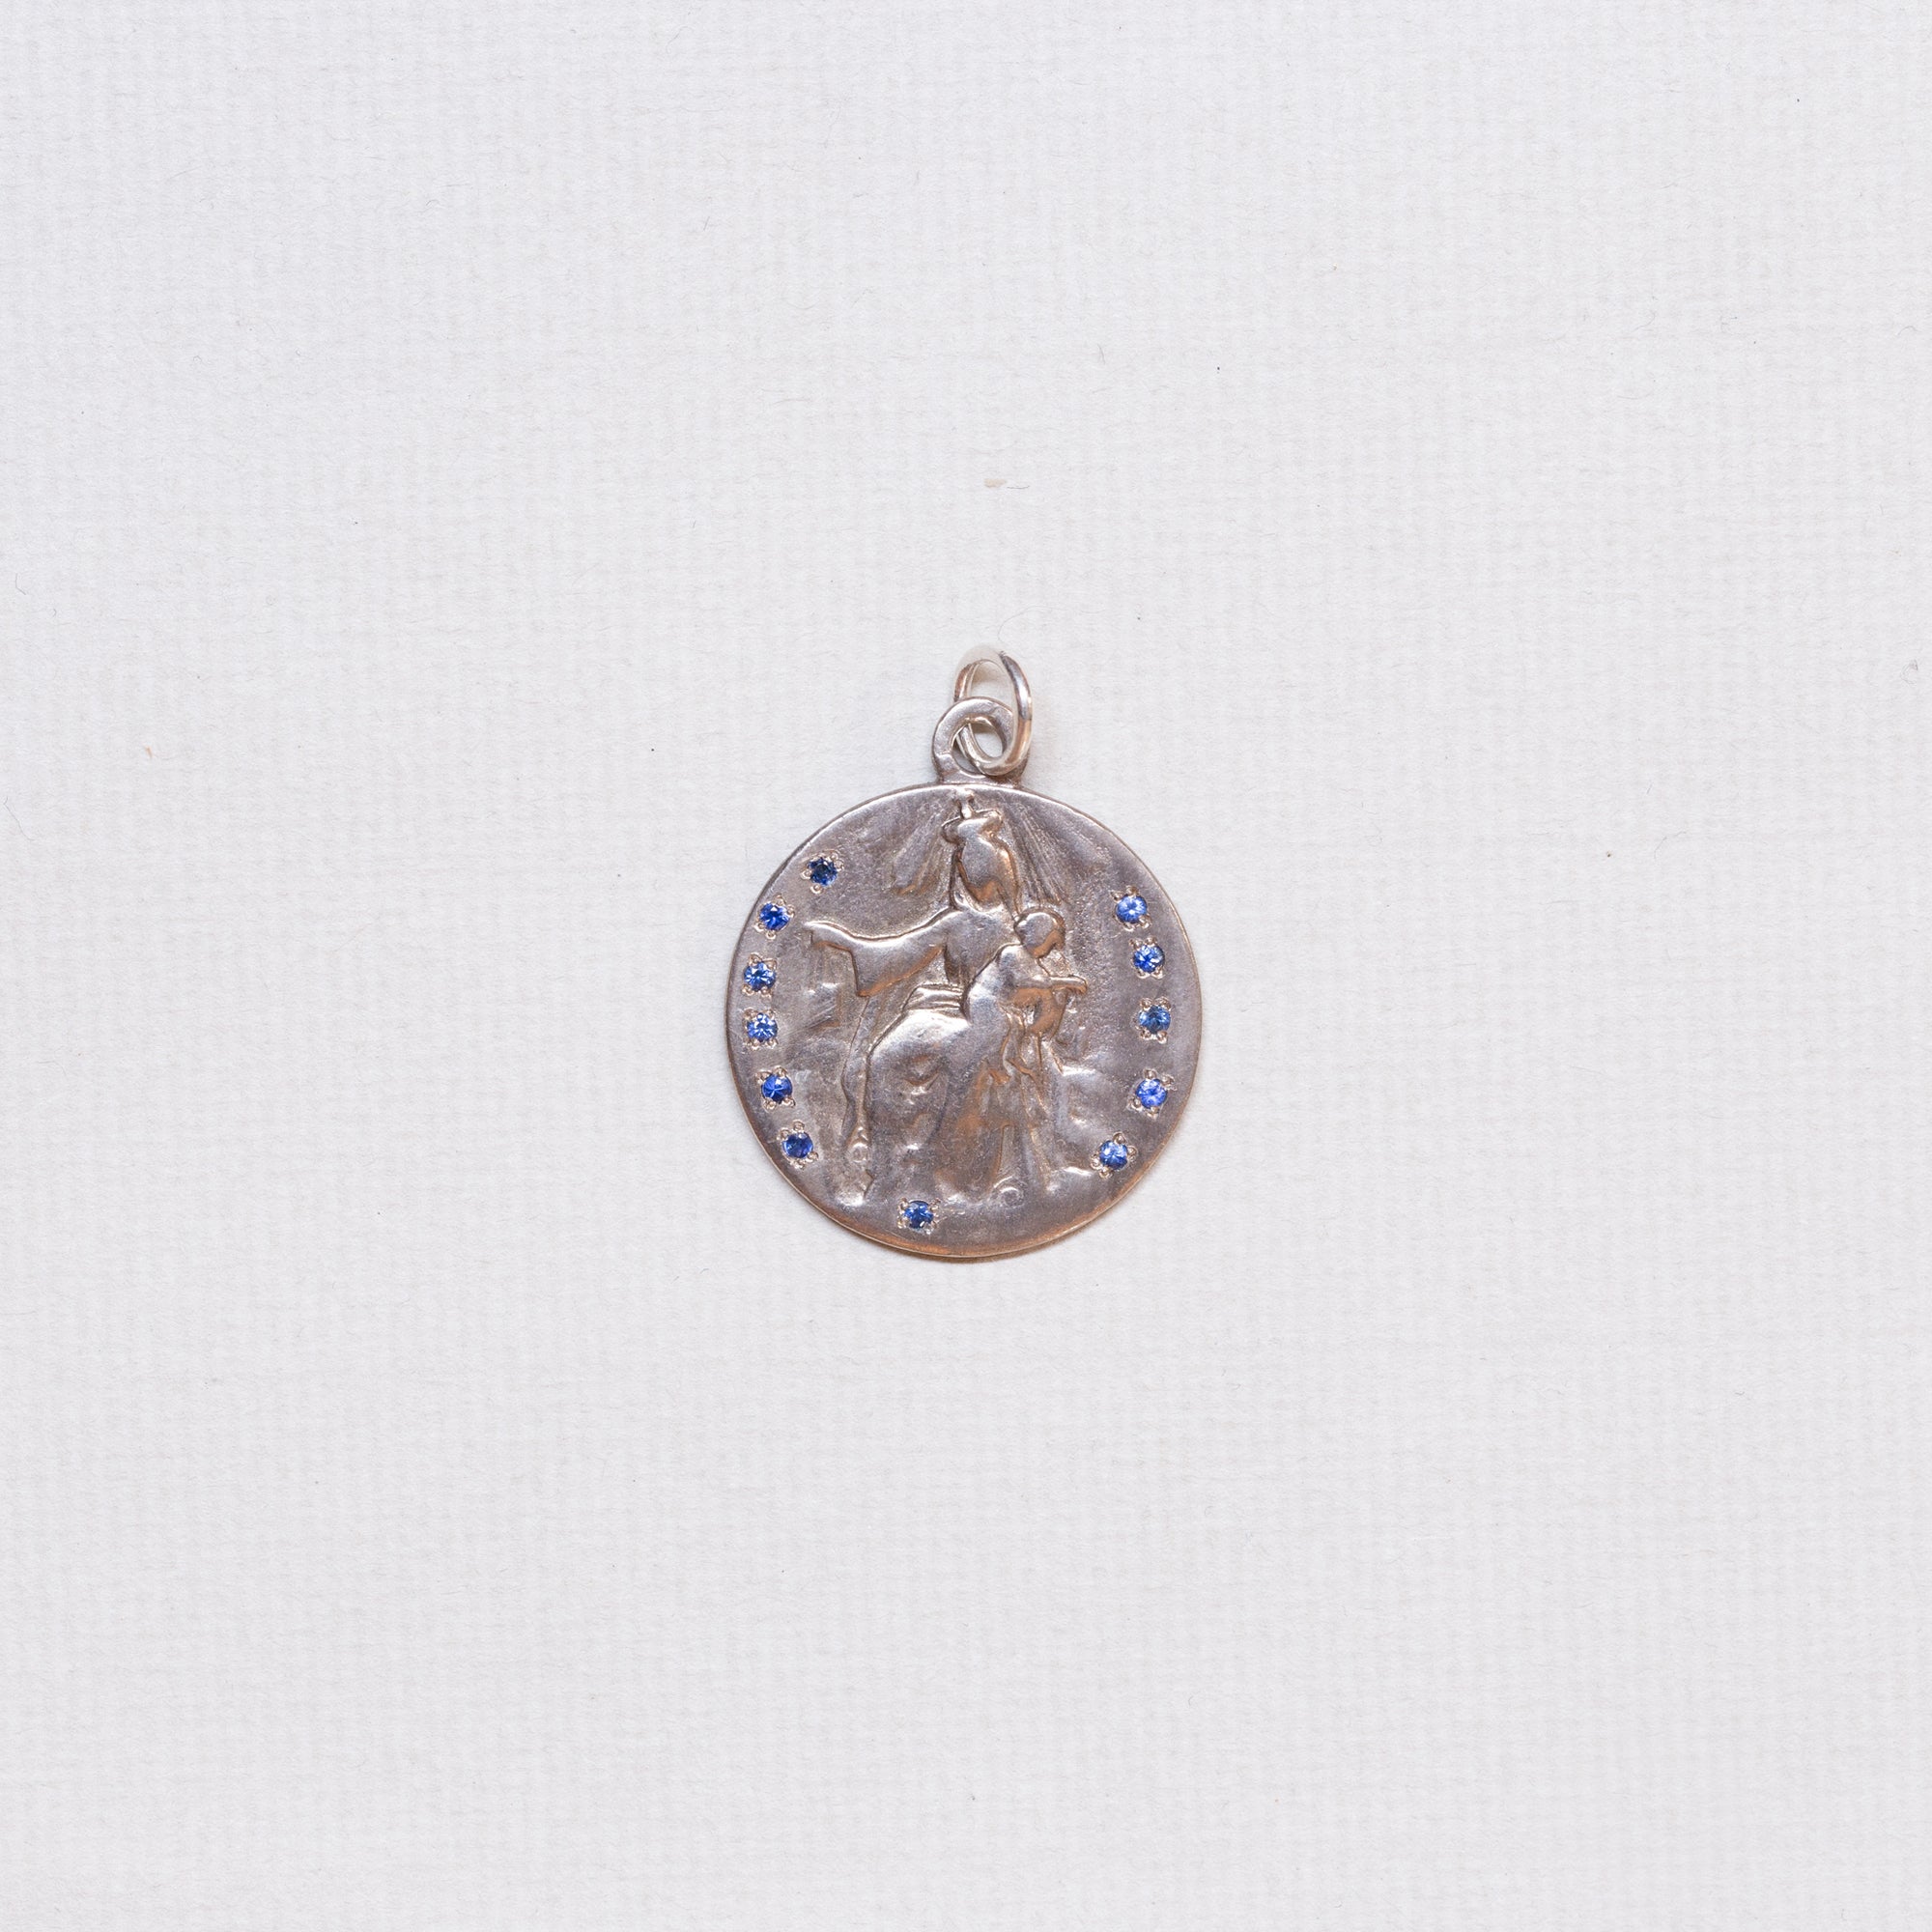 Vintage Sterling Silver Madonna Charm Pendant with Sapphires